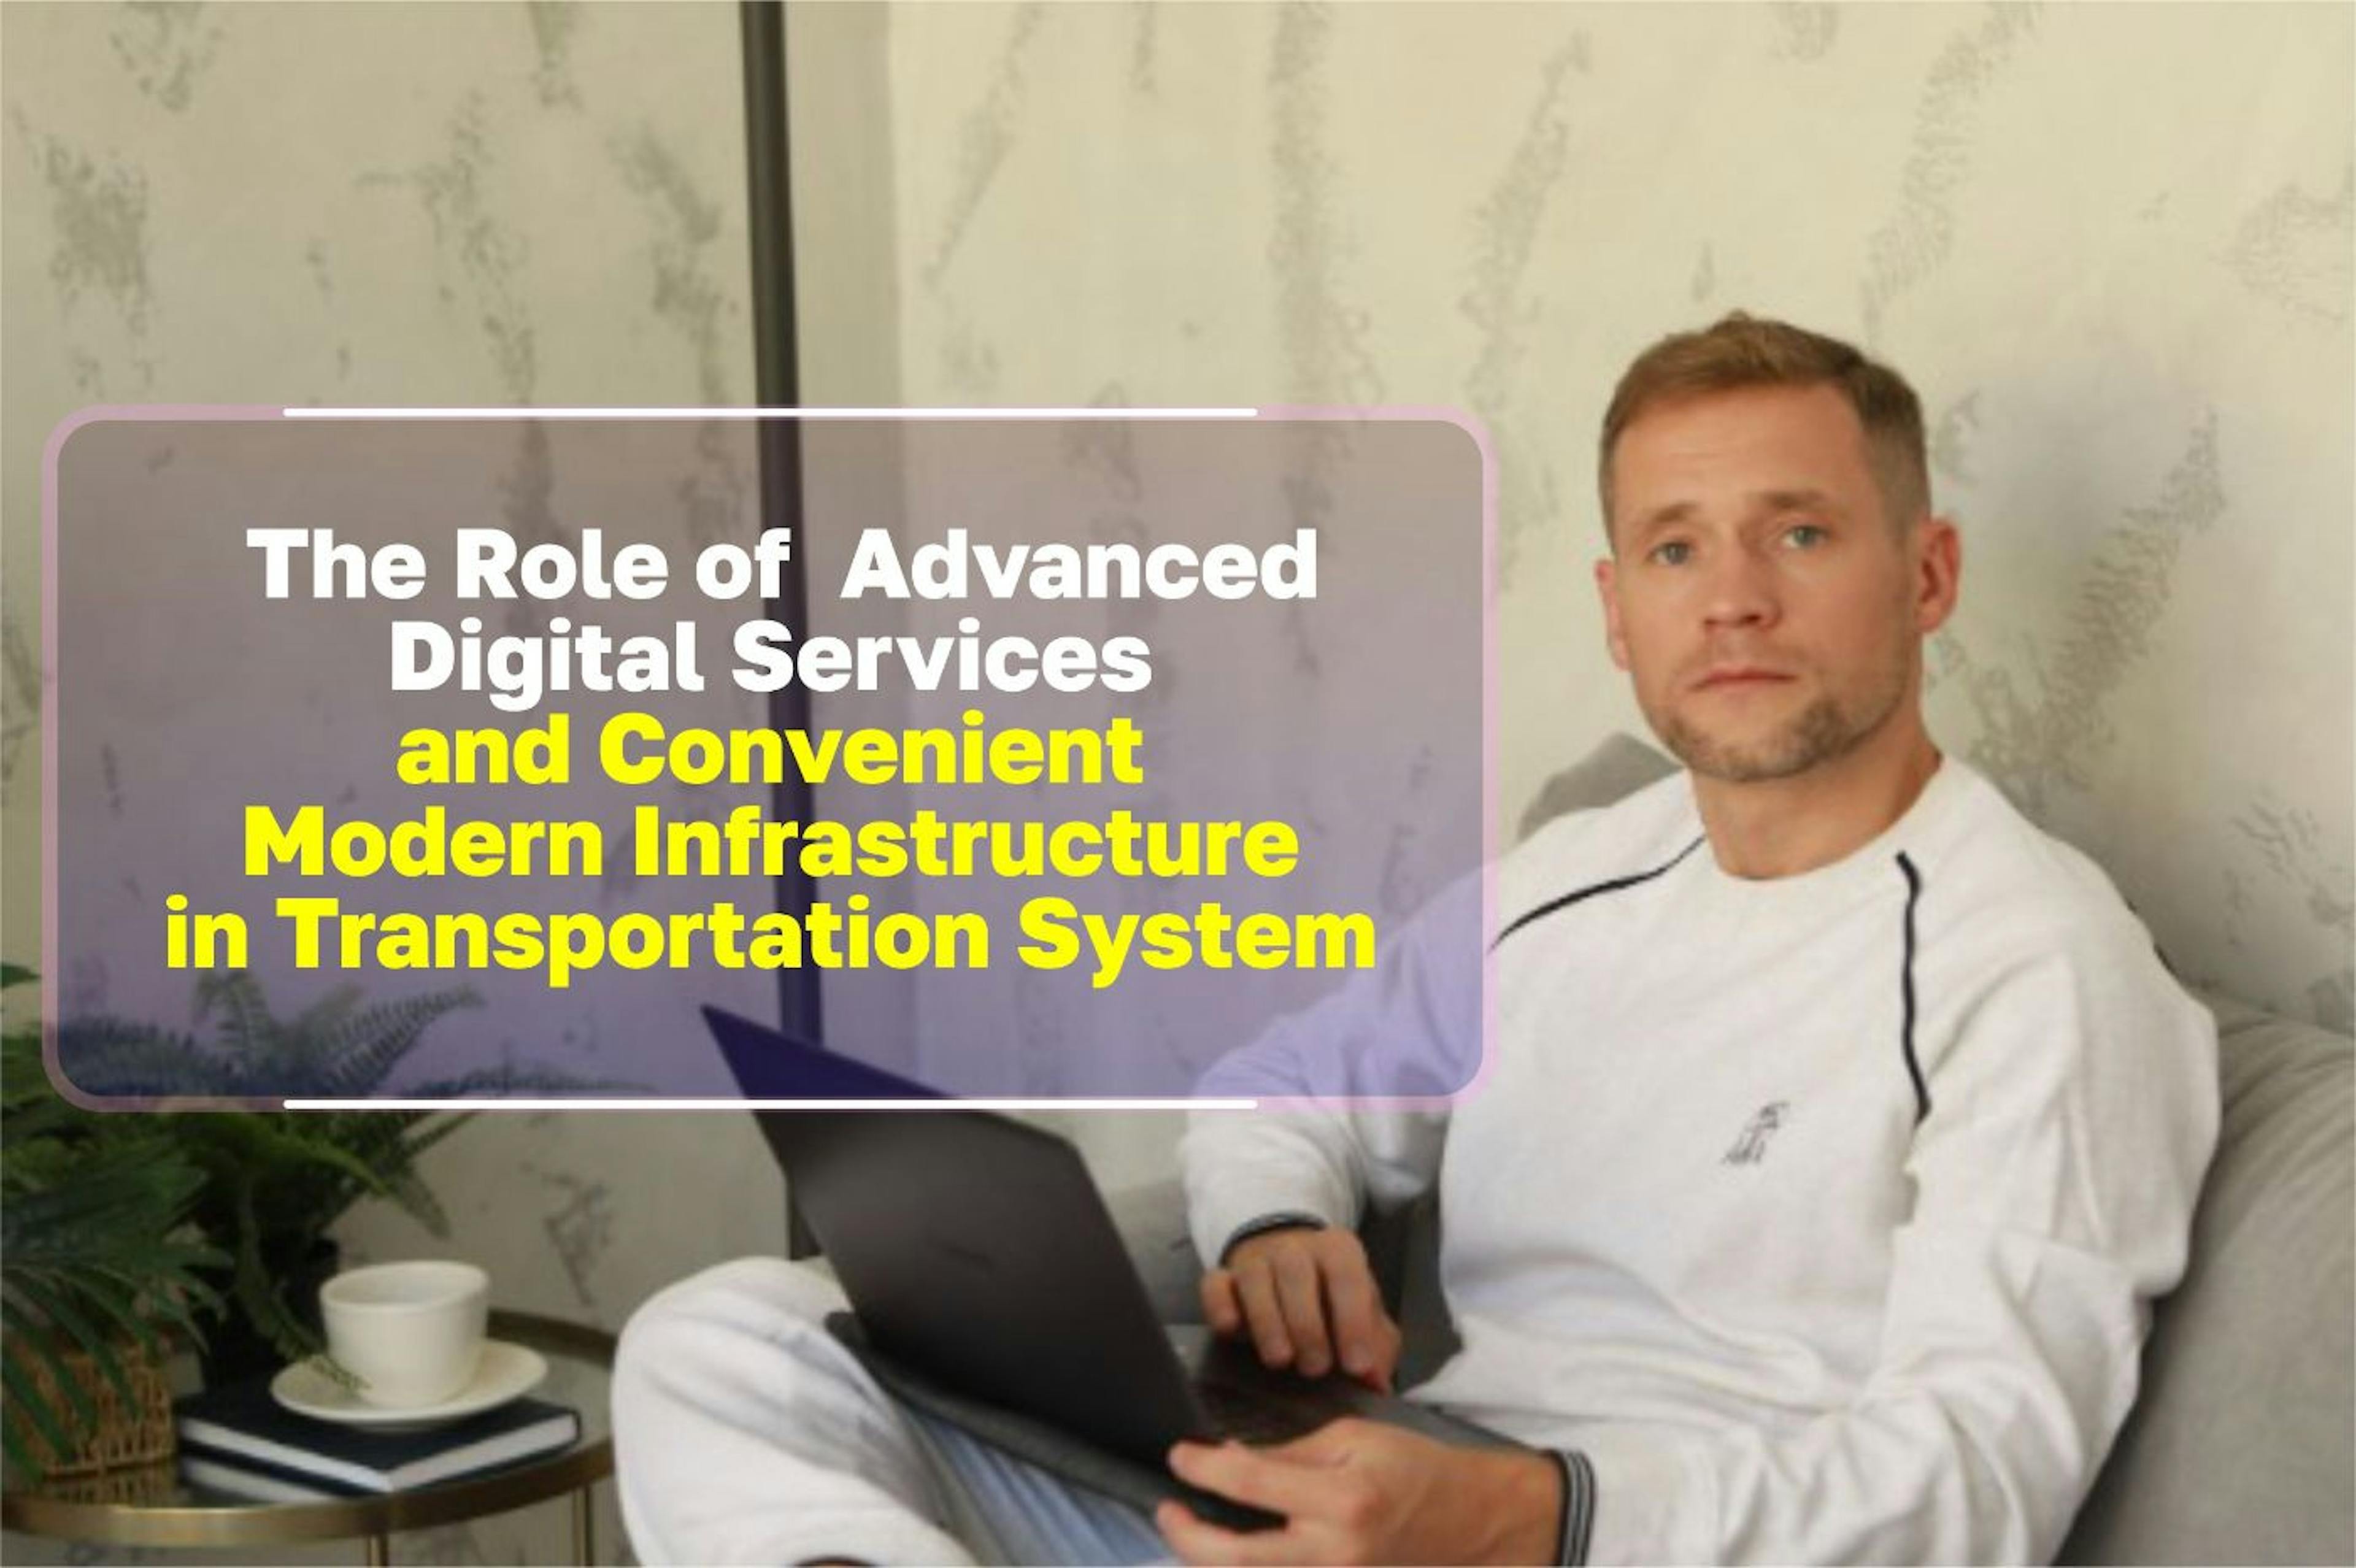 featured image - The Role of Advanced Digital Services and Convenient Modern Infrastructure in Transportation Systems